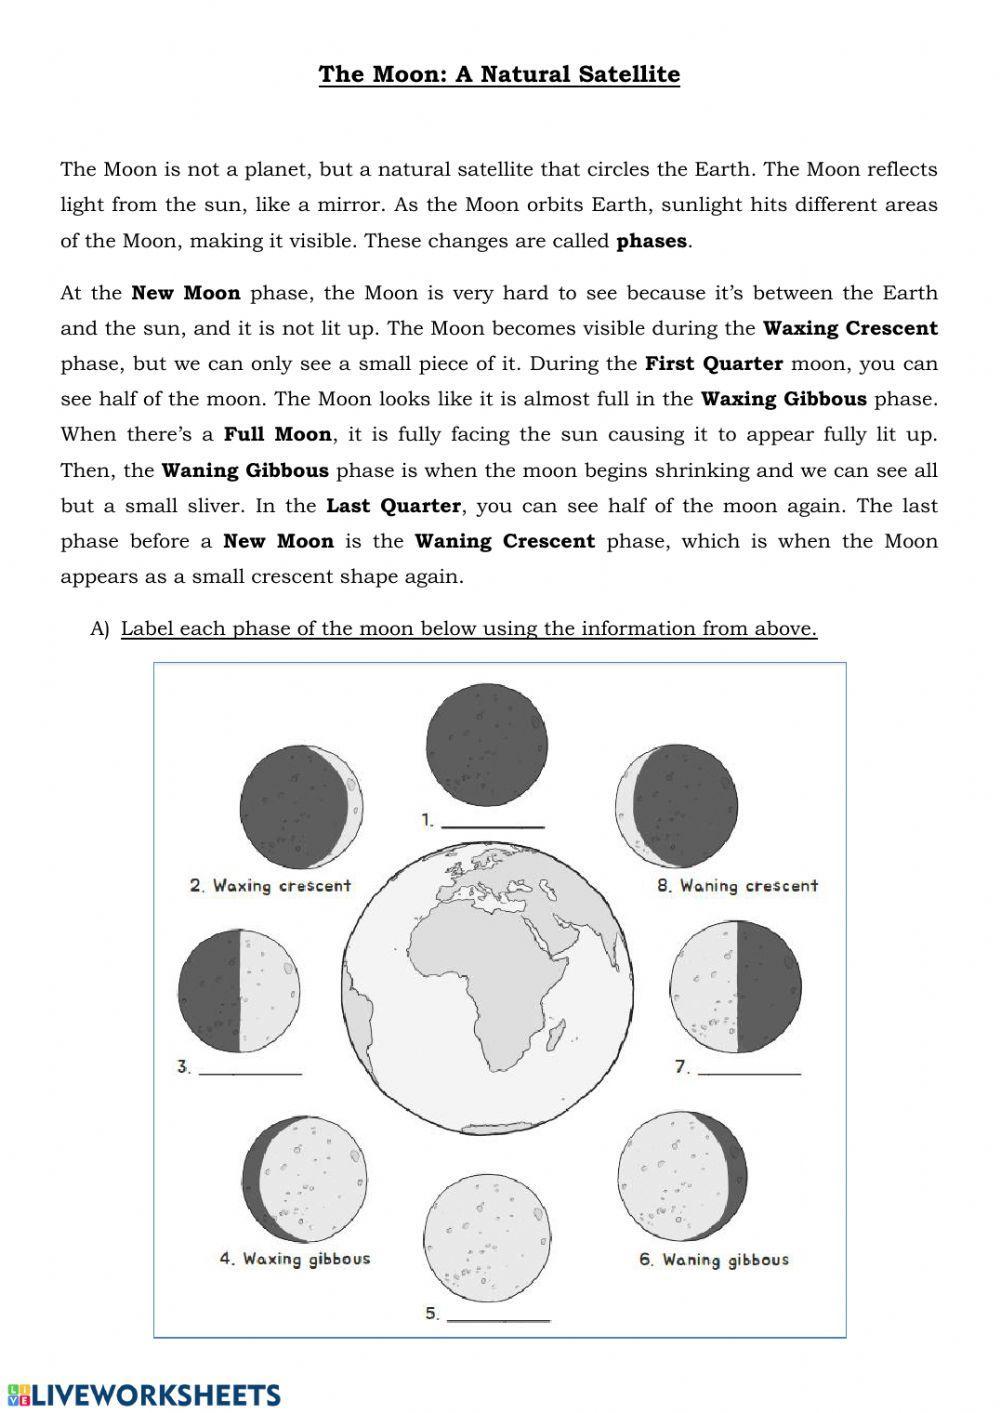 The Moon Phases and Eclipse